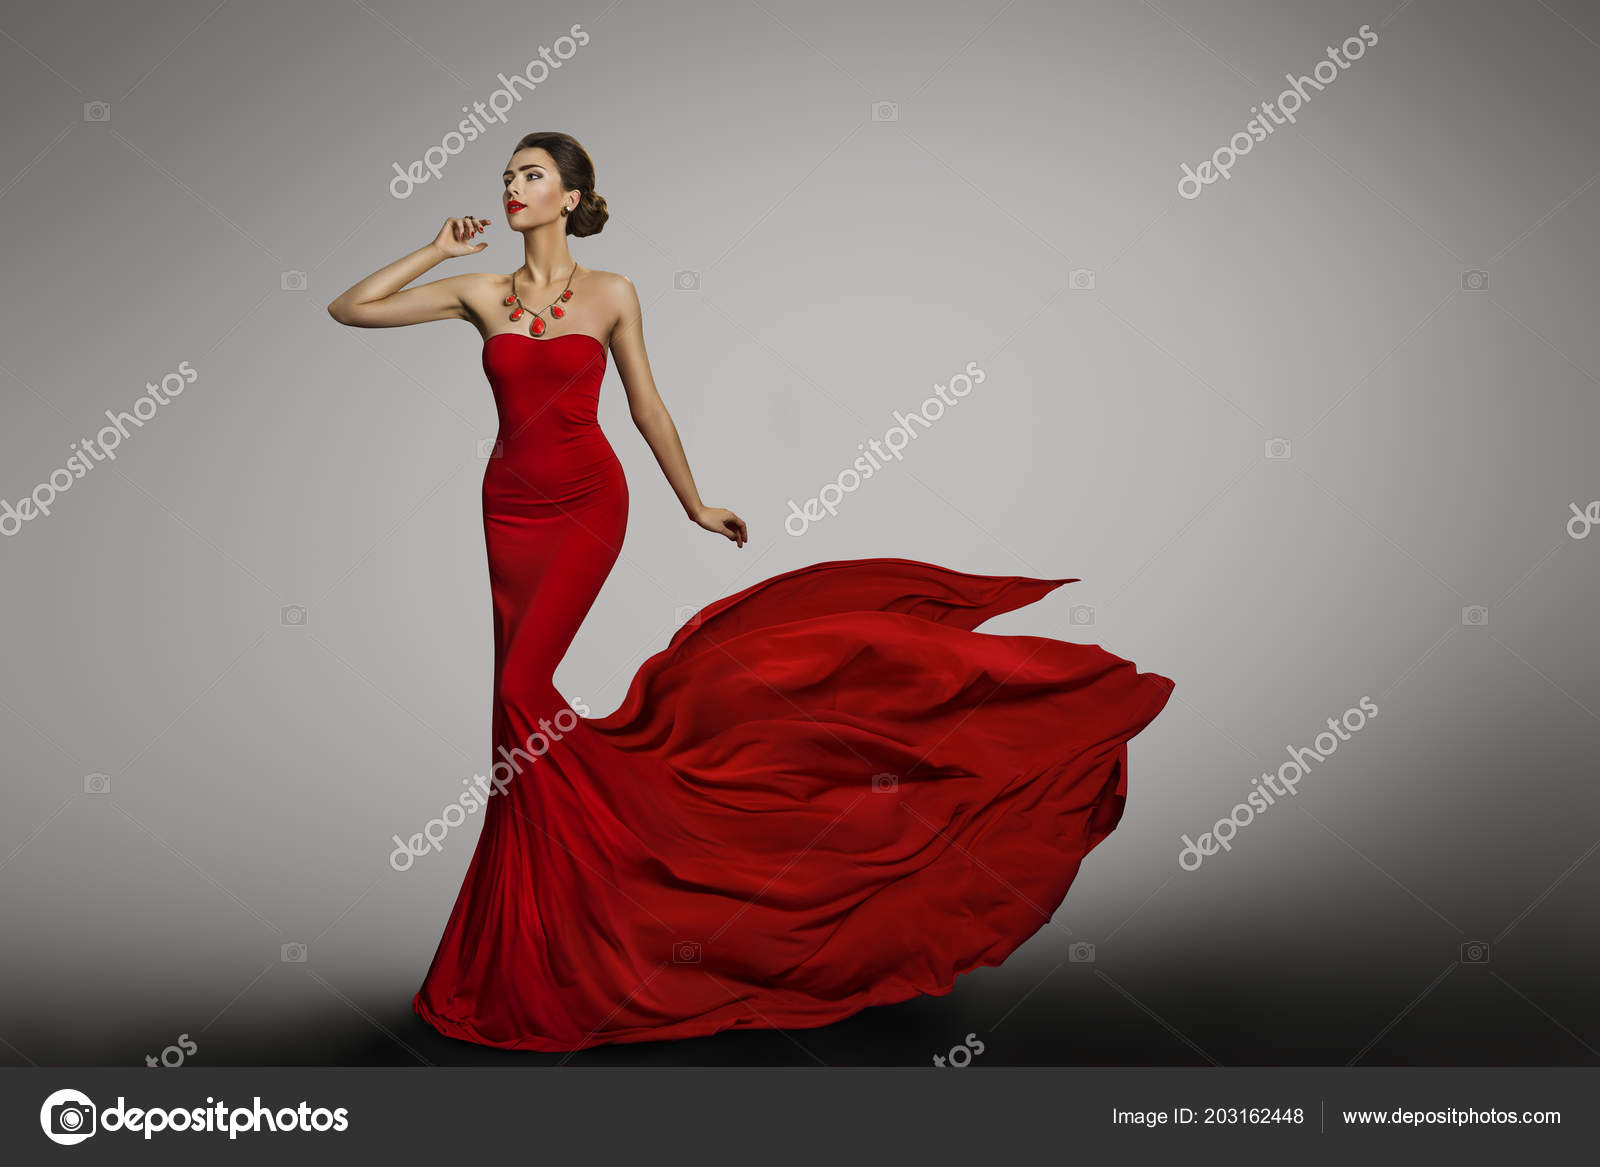 Premium Photo | A woman in a red dress is standing on a train tracks.